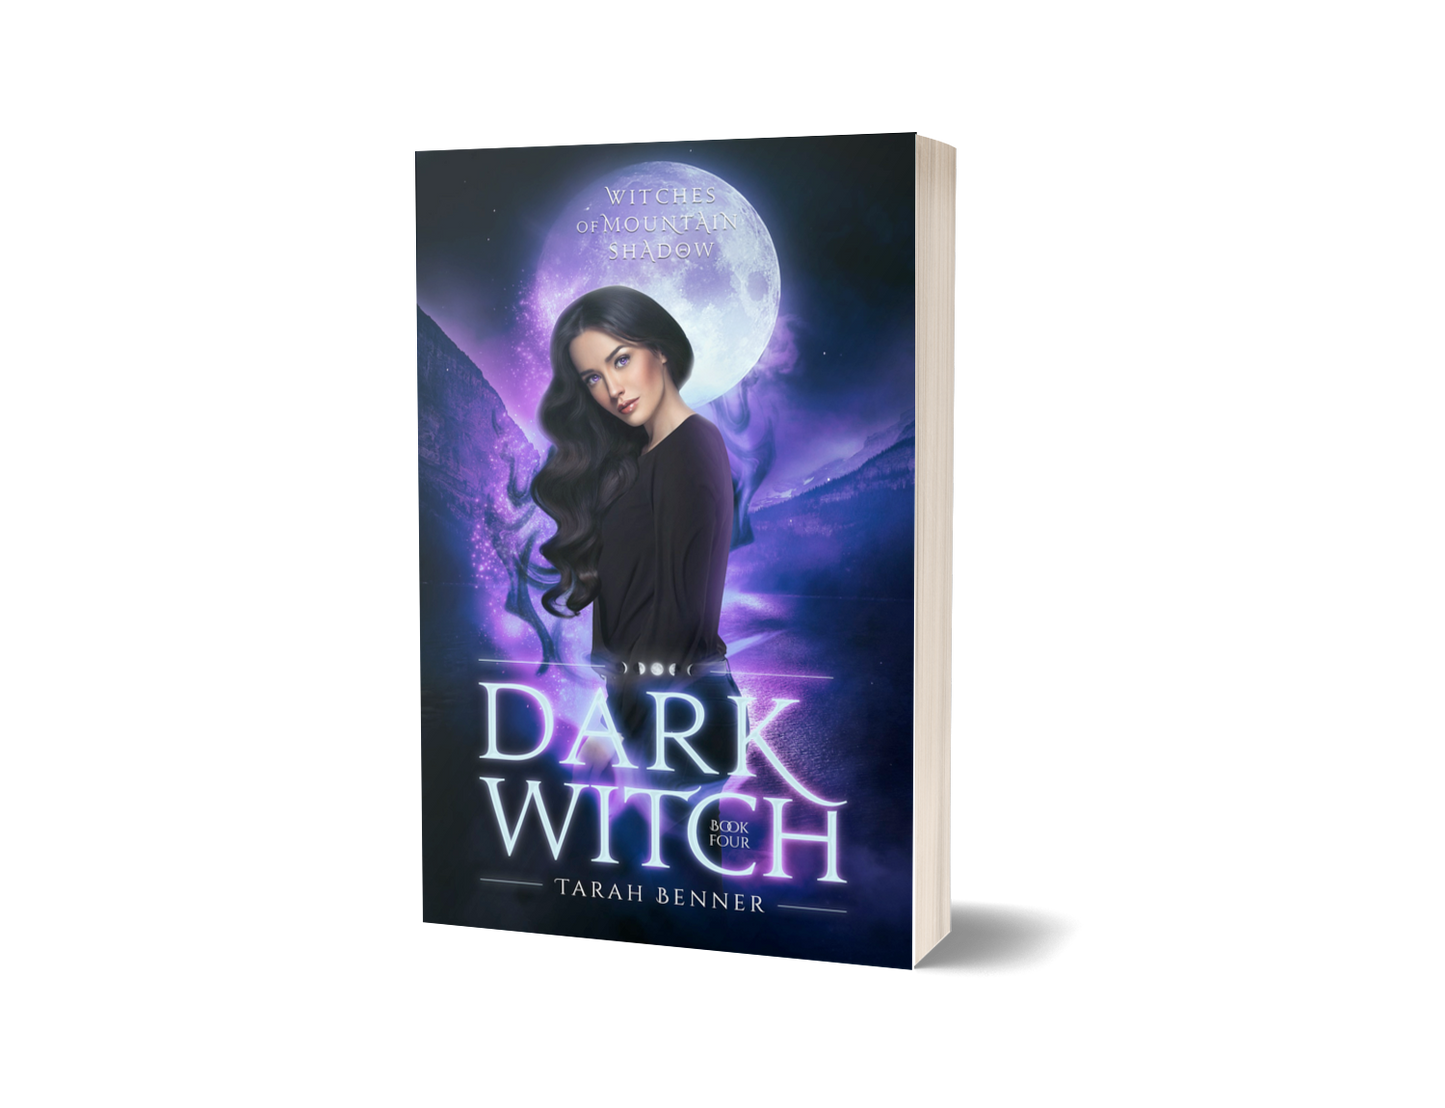 Dark Witch: Witches of Mountain Shadow Book Four (Paperback Edition)